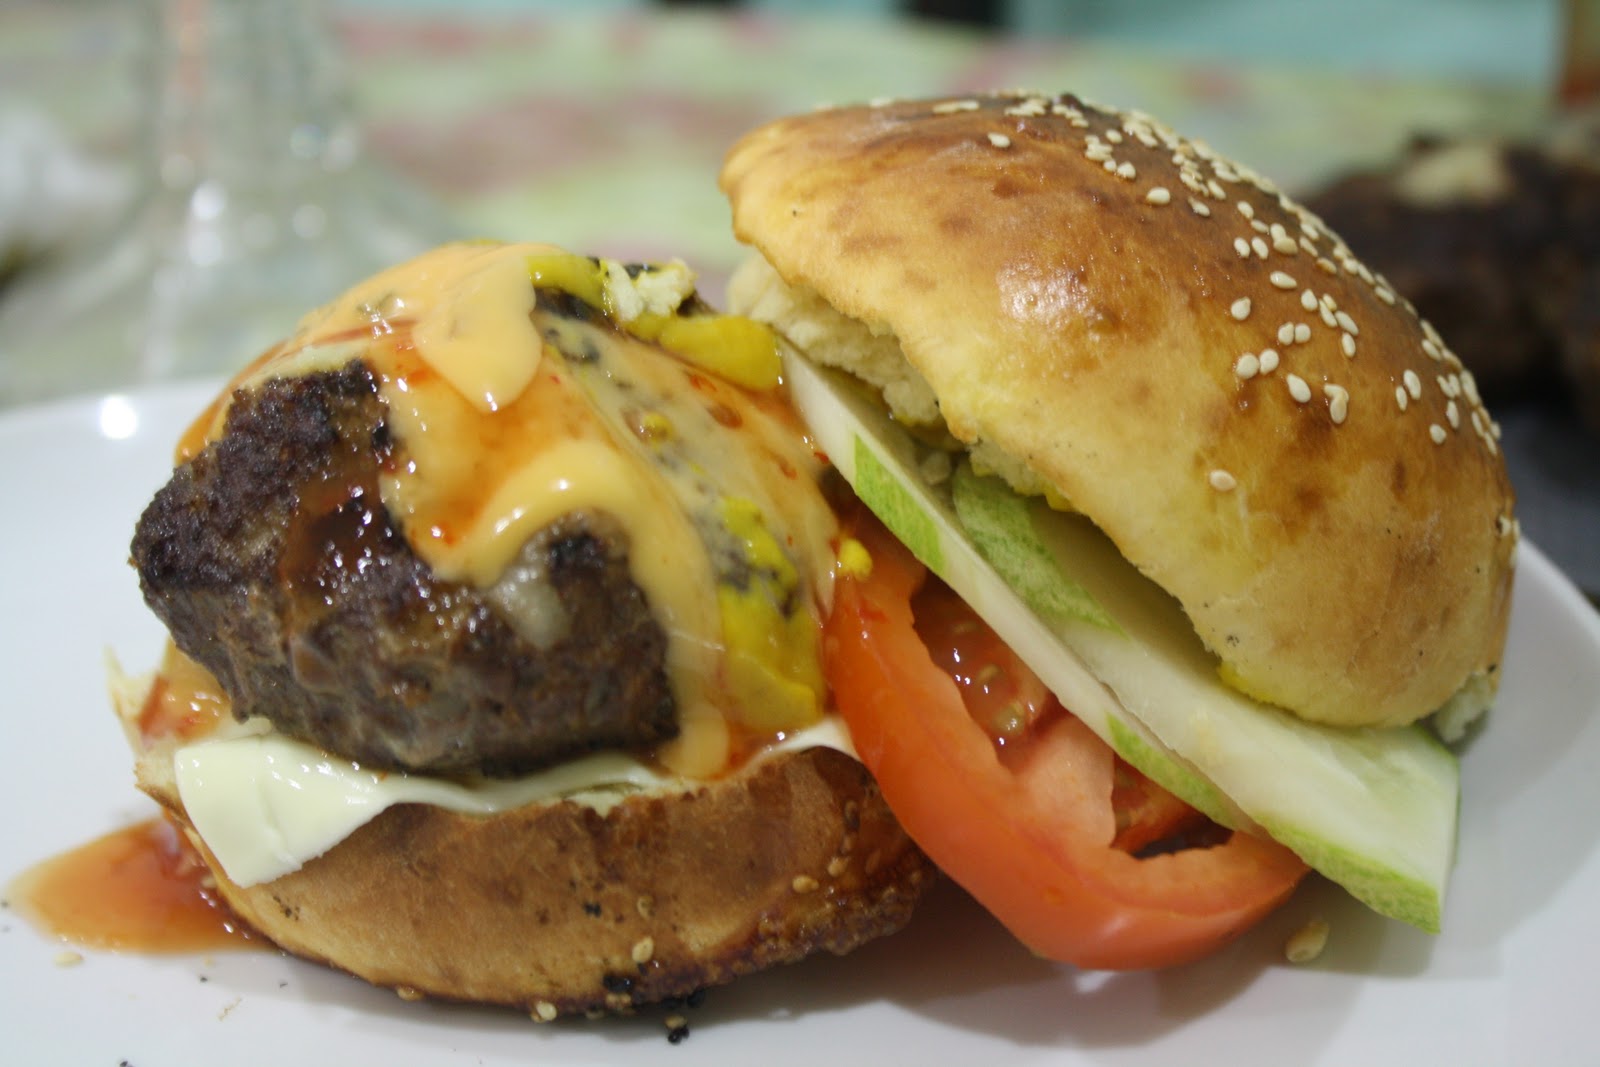 #The Beauty In Everyday Life#: Homemade burger bun and 